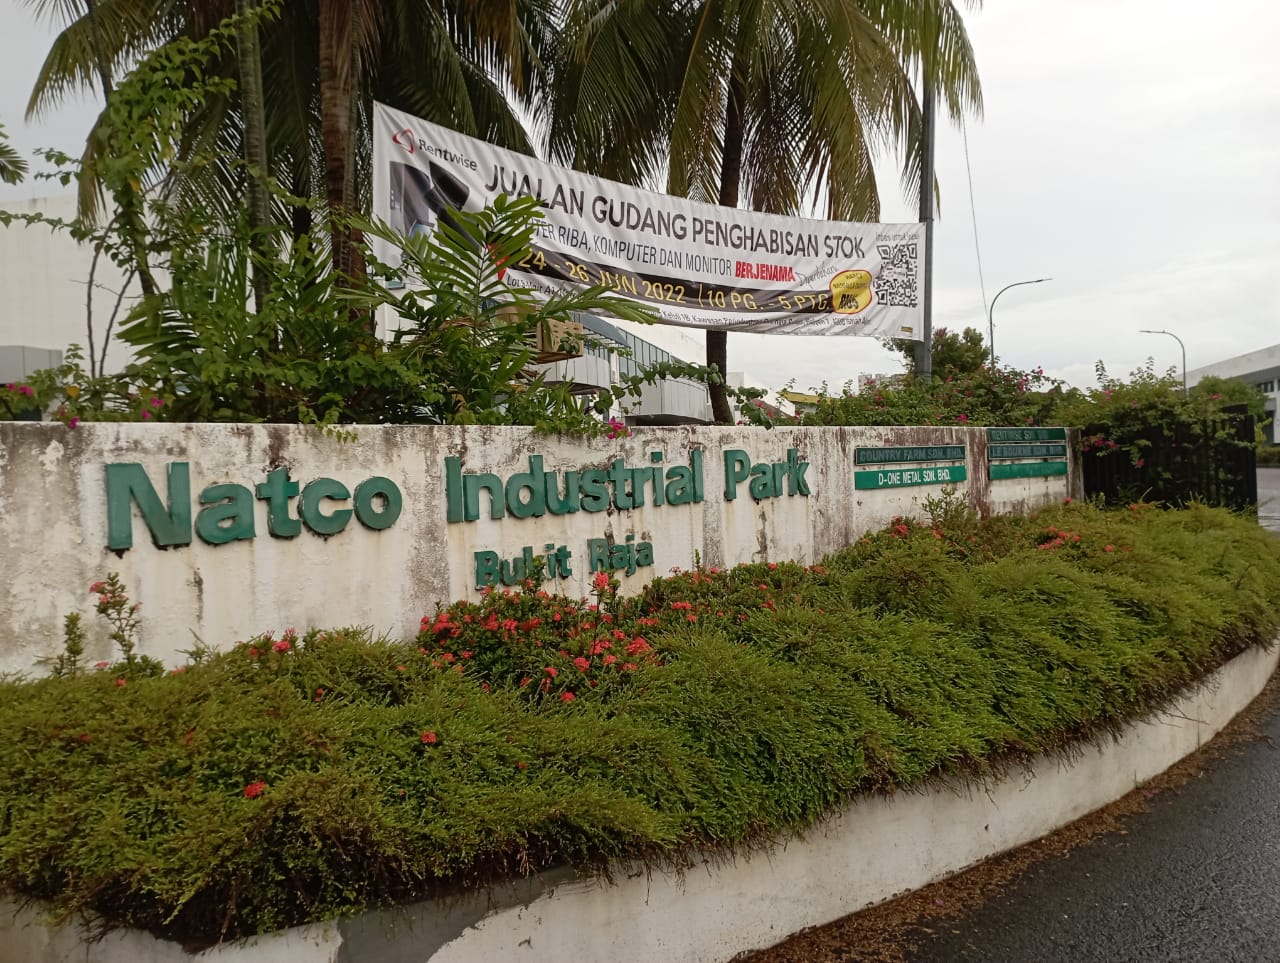 rentwise-warehouse-sale-at-natco-industrial-park-shah-alam